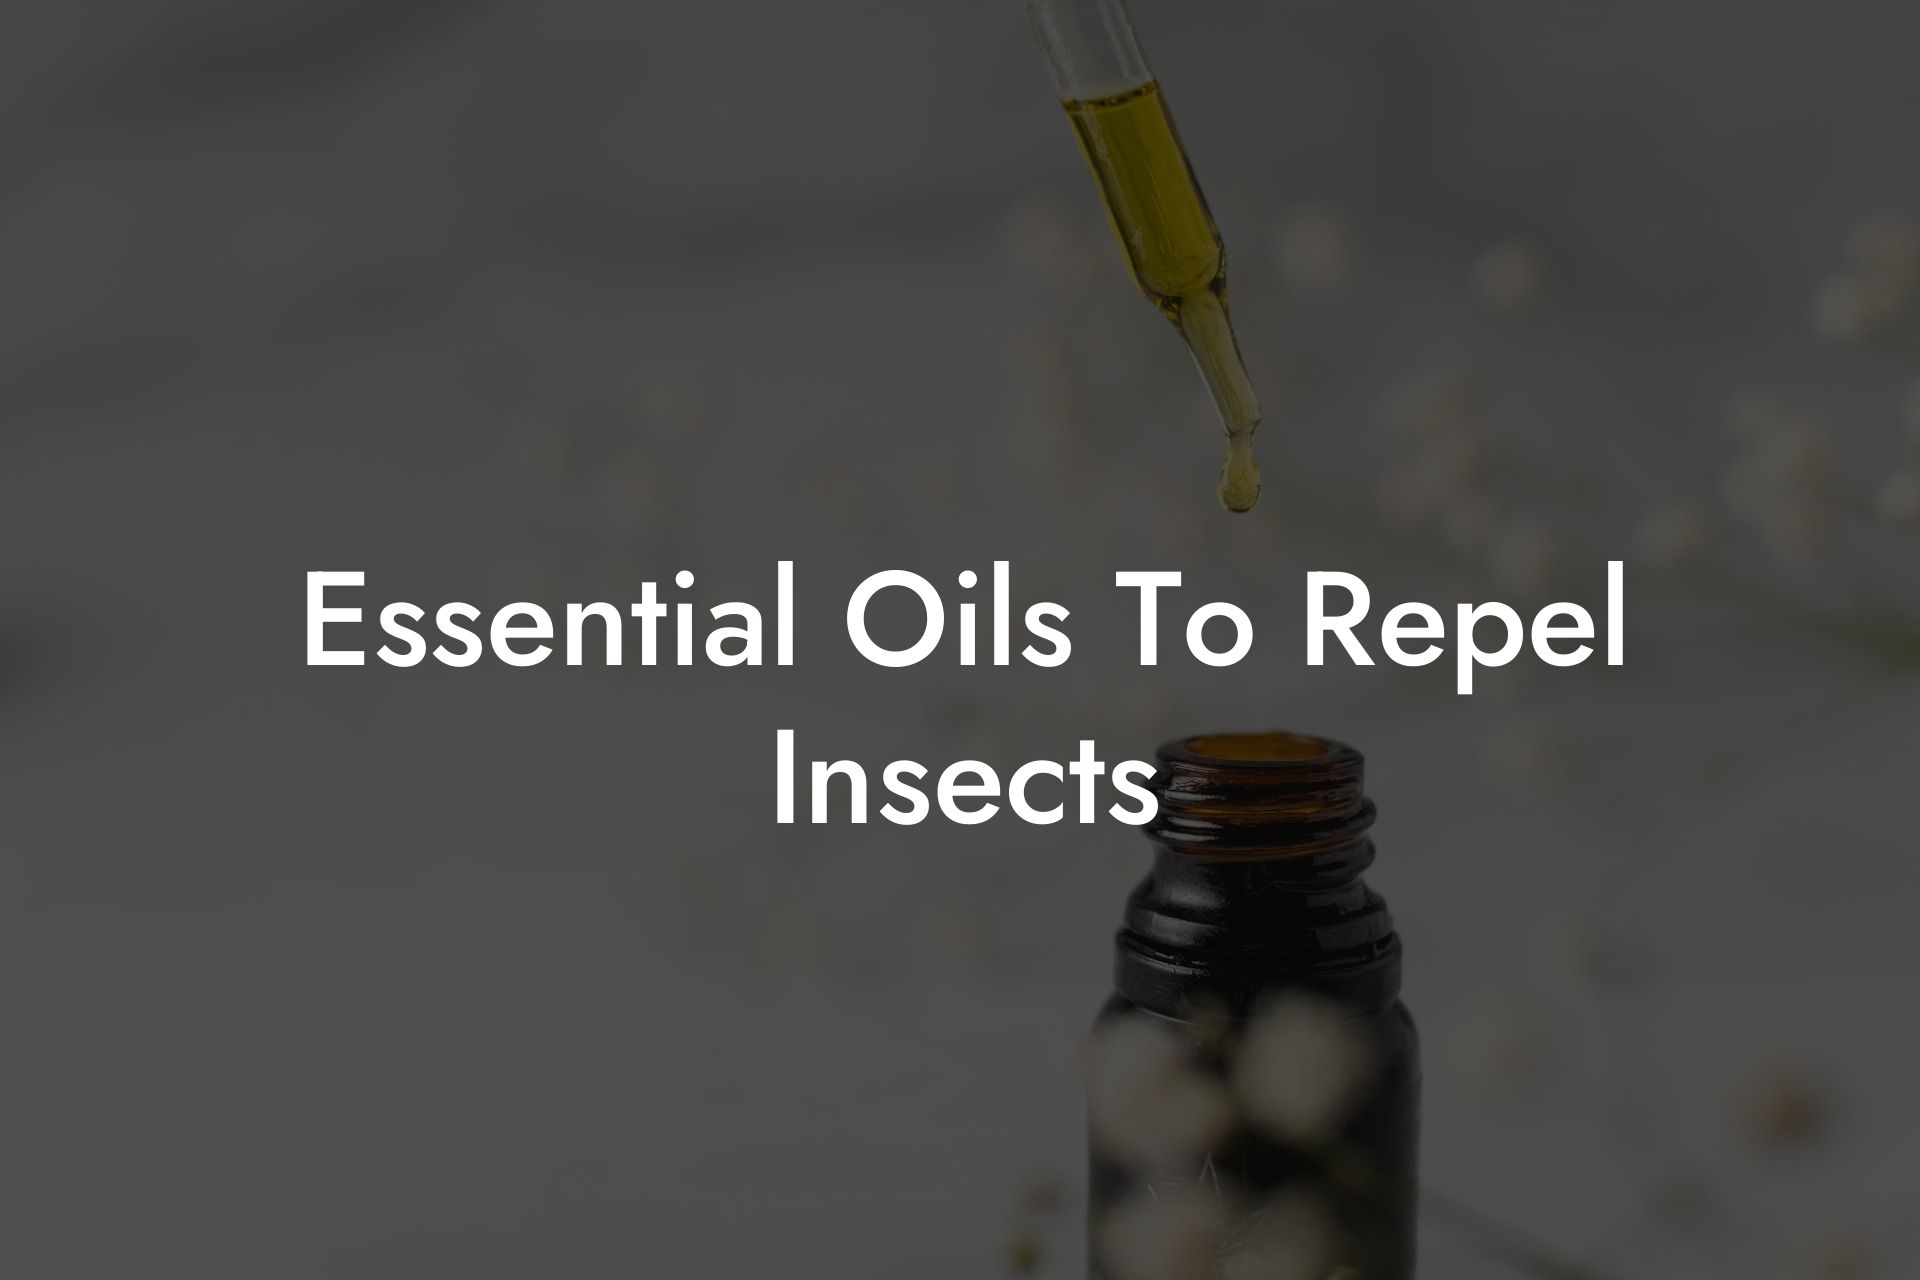 Essential Oils To Repel Insects